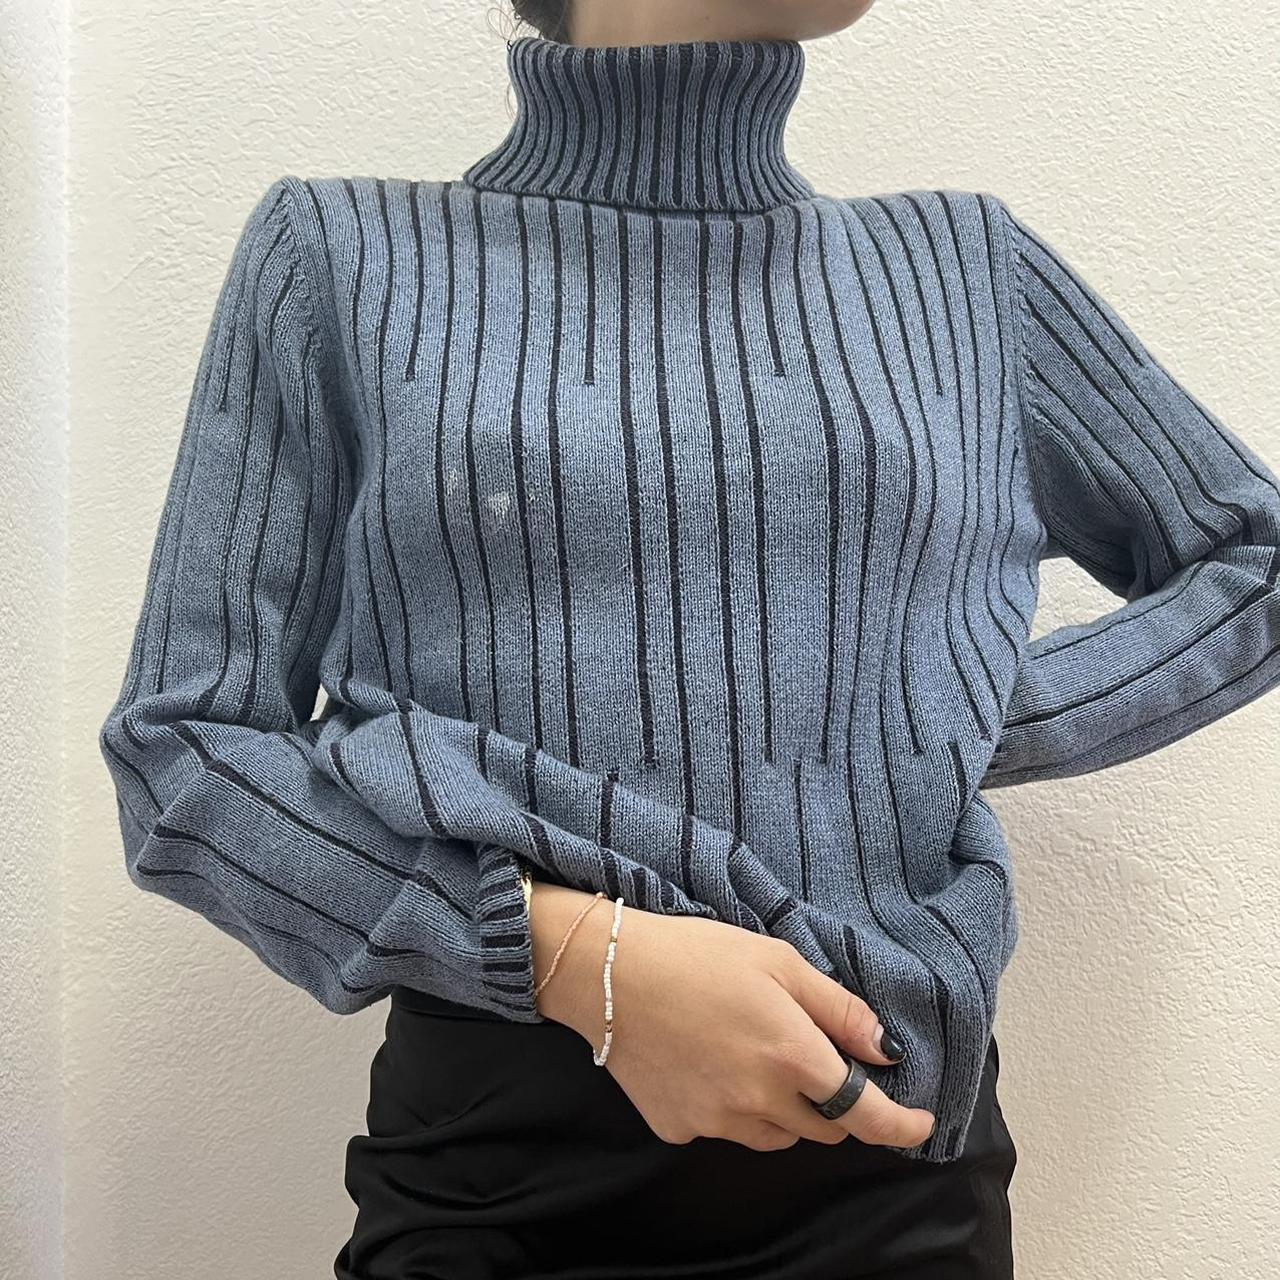 1990's Wool Turtleneck Sweater in Blue With Black 